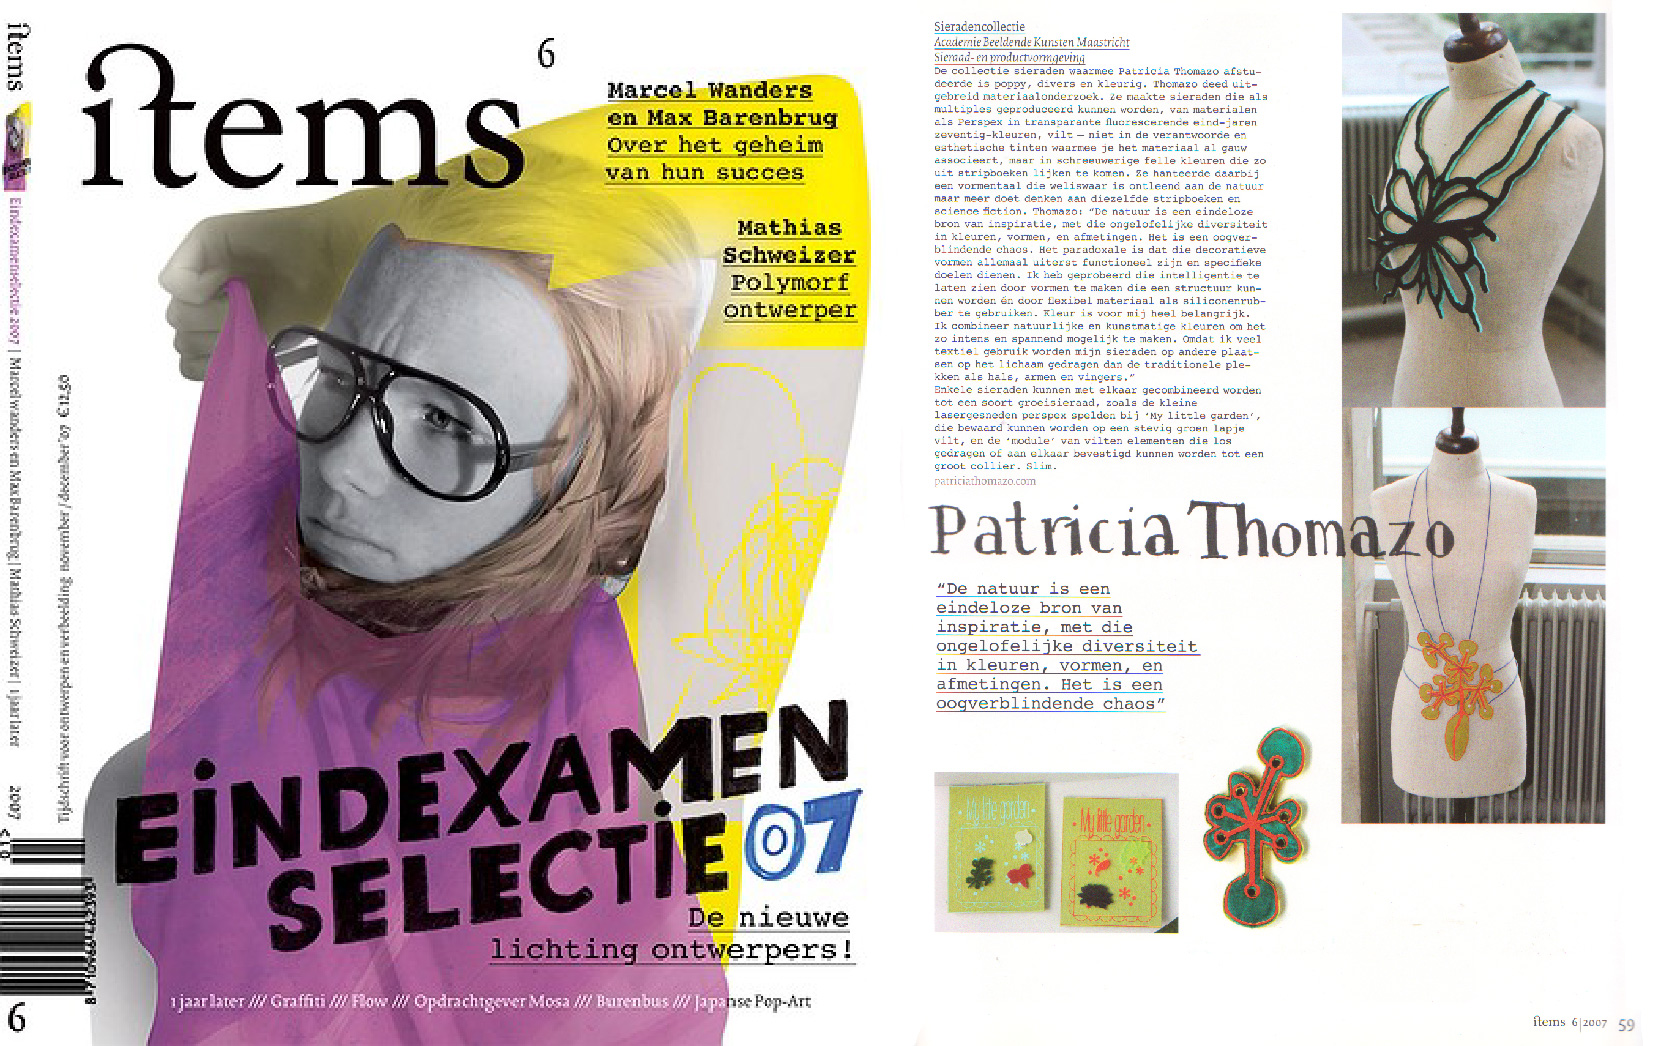 items magazine, the final exam selection of 2007 number, interview of Patricia Thomazo's jewellery work